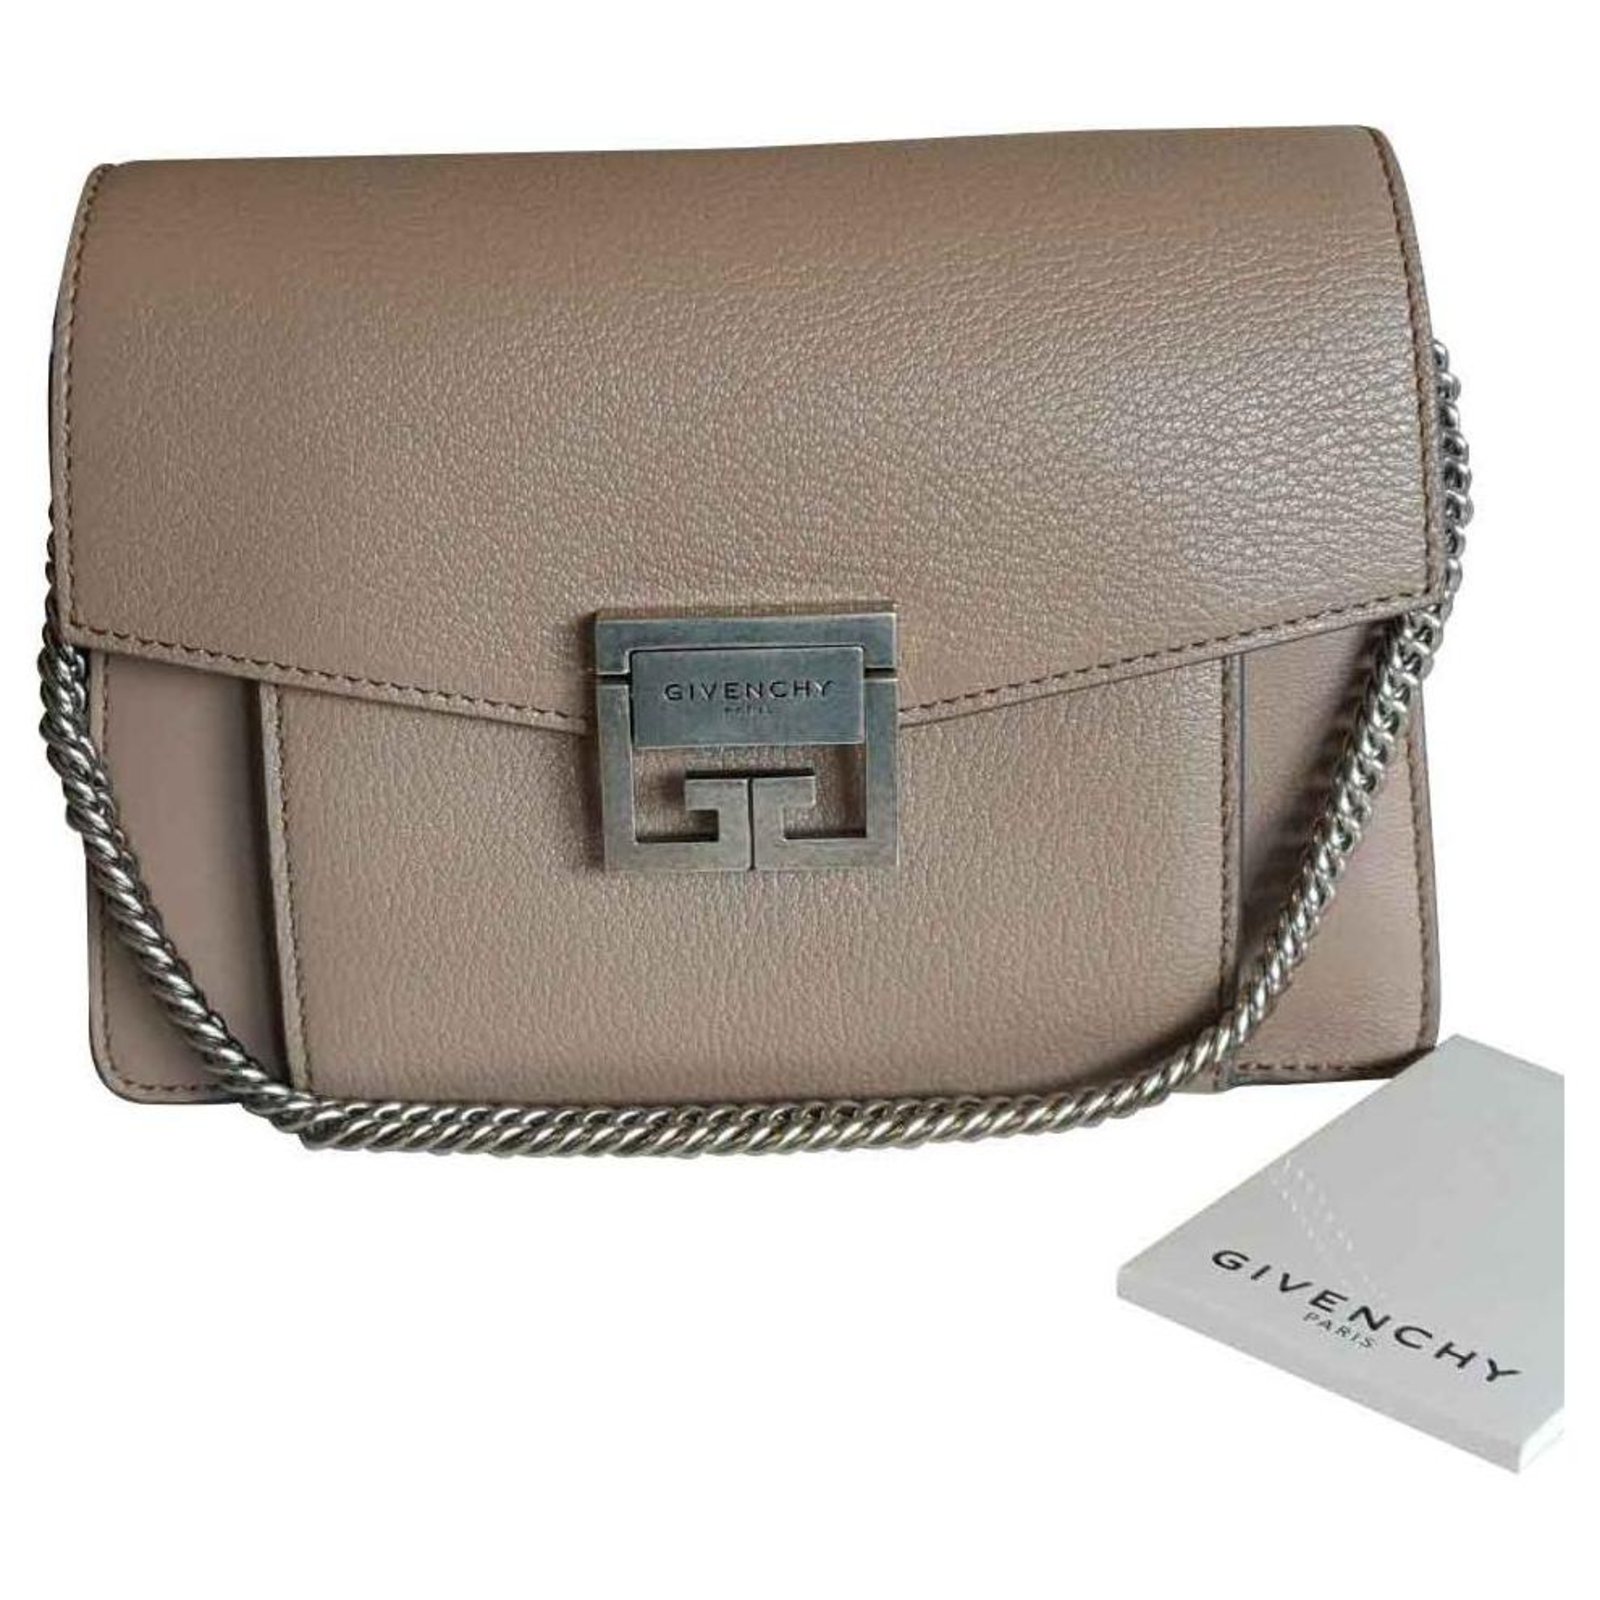 Givenchy GV3 Handbags Leather Beige ref 